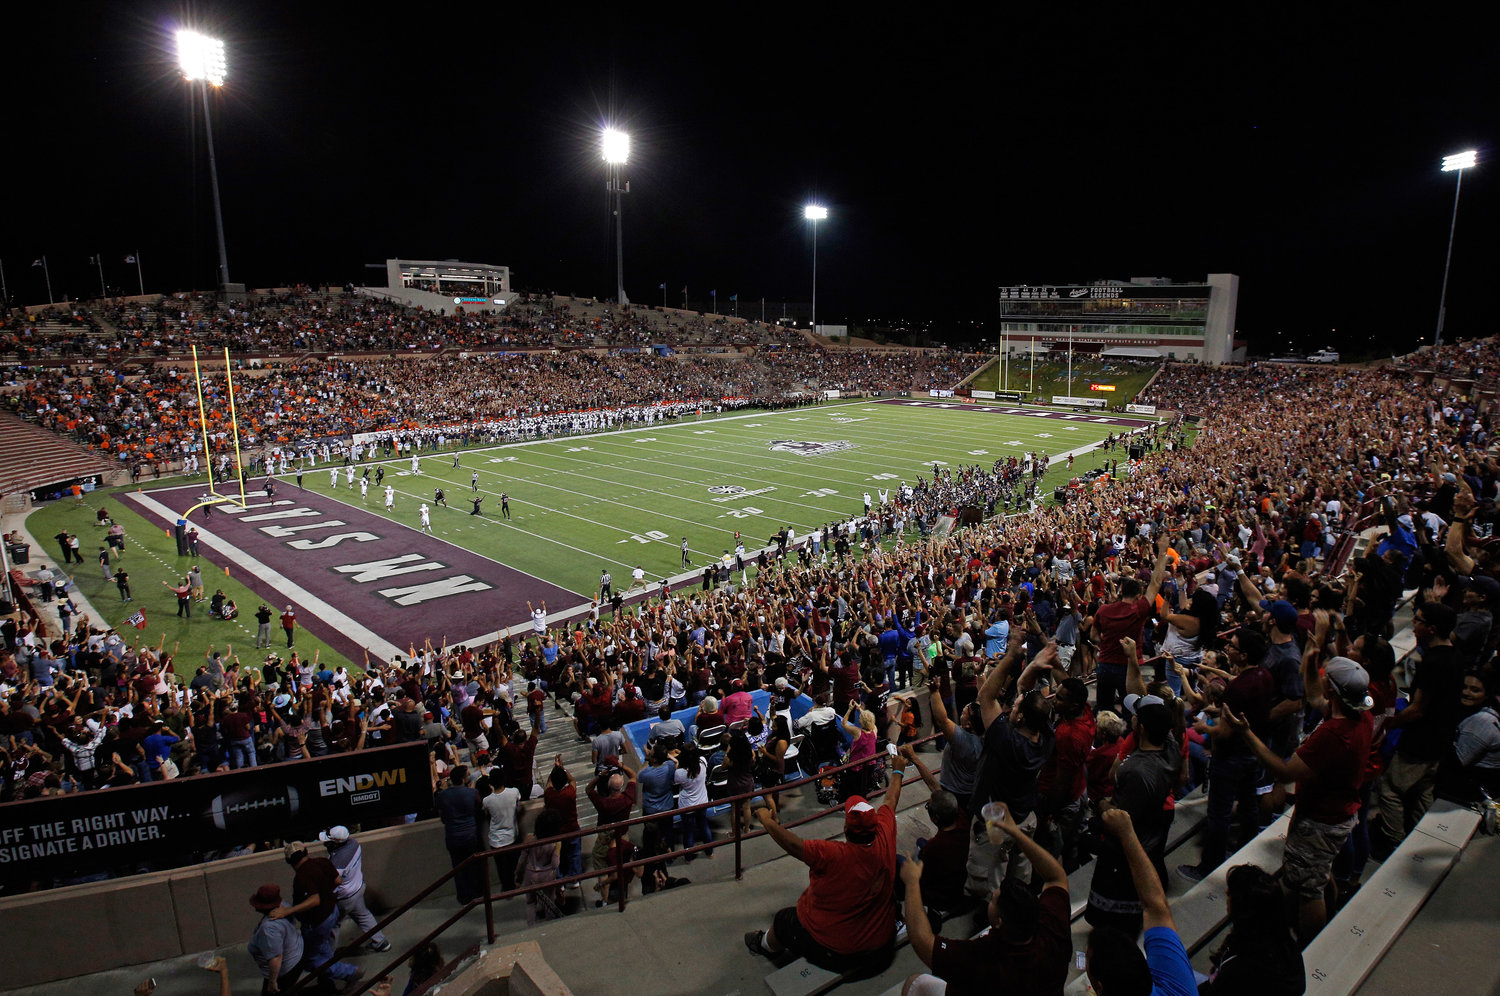 New Mexico State University will allow 100 percent attendance capacity at all its sports venues for the coming school year. That means football fans will be able to enjoy some action at Aggie Memorial Stadium.